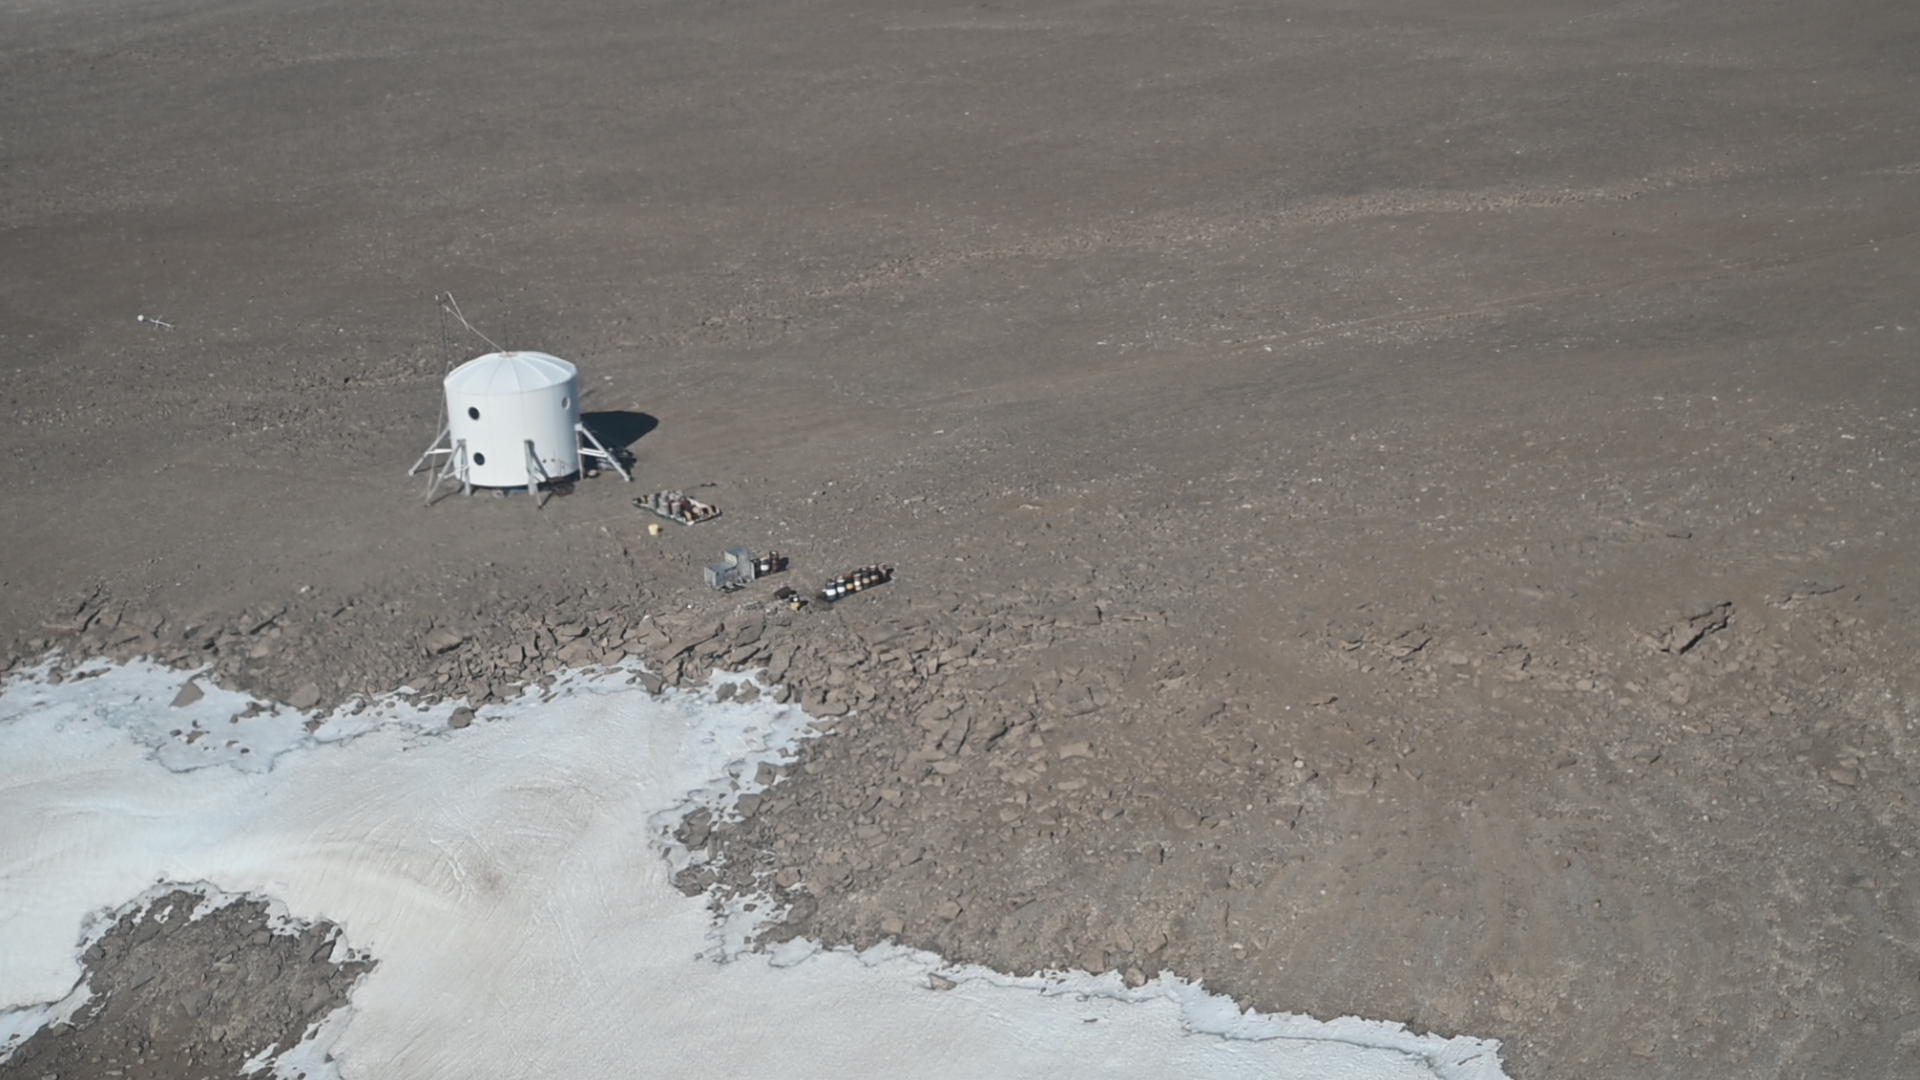 a white tent-like structure sits a rocky barren landscape as seen from the air